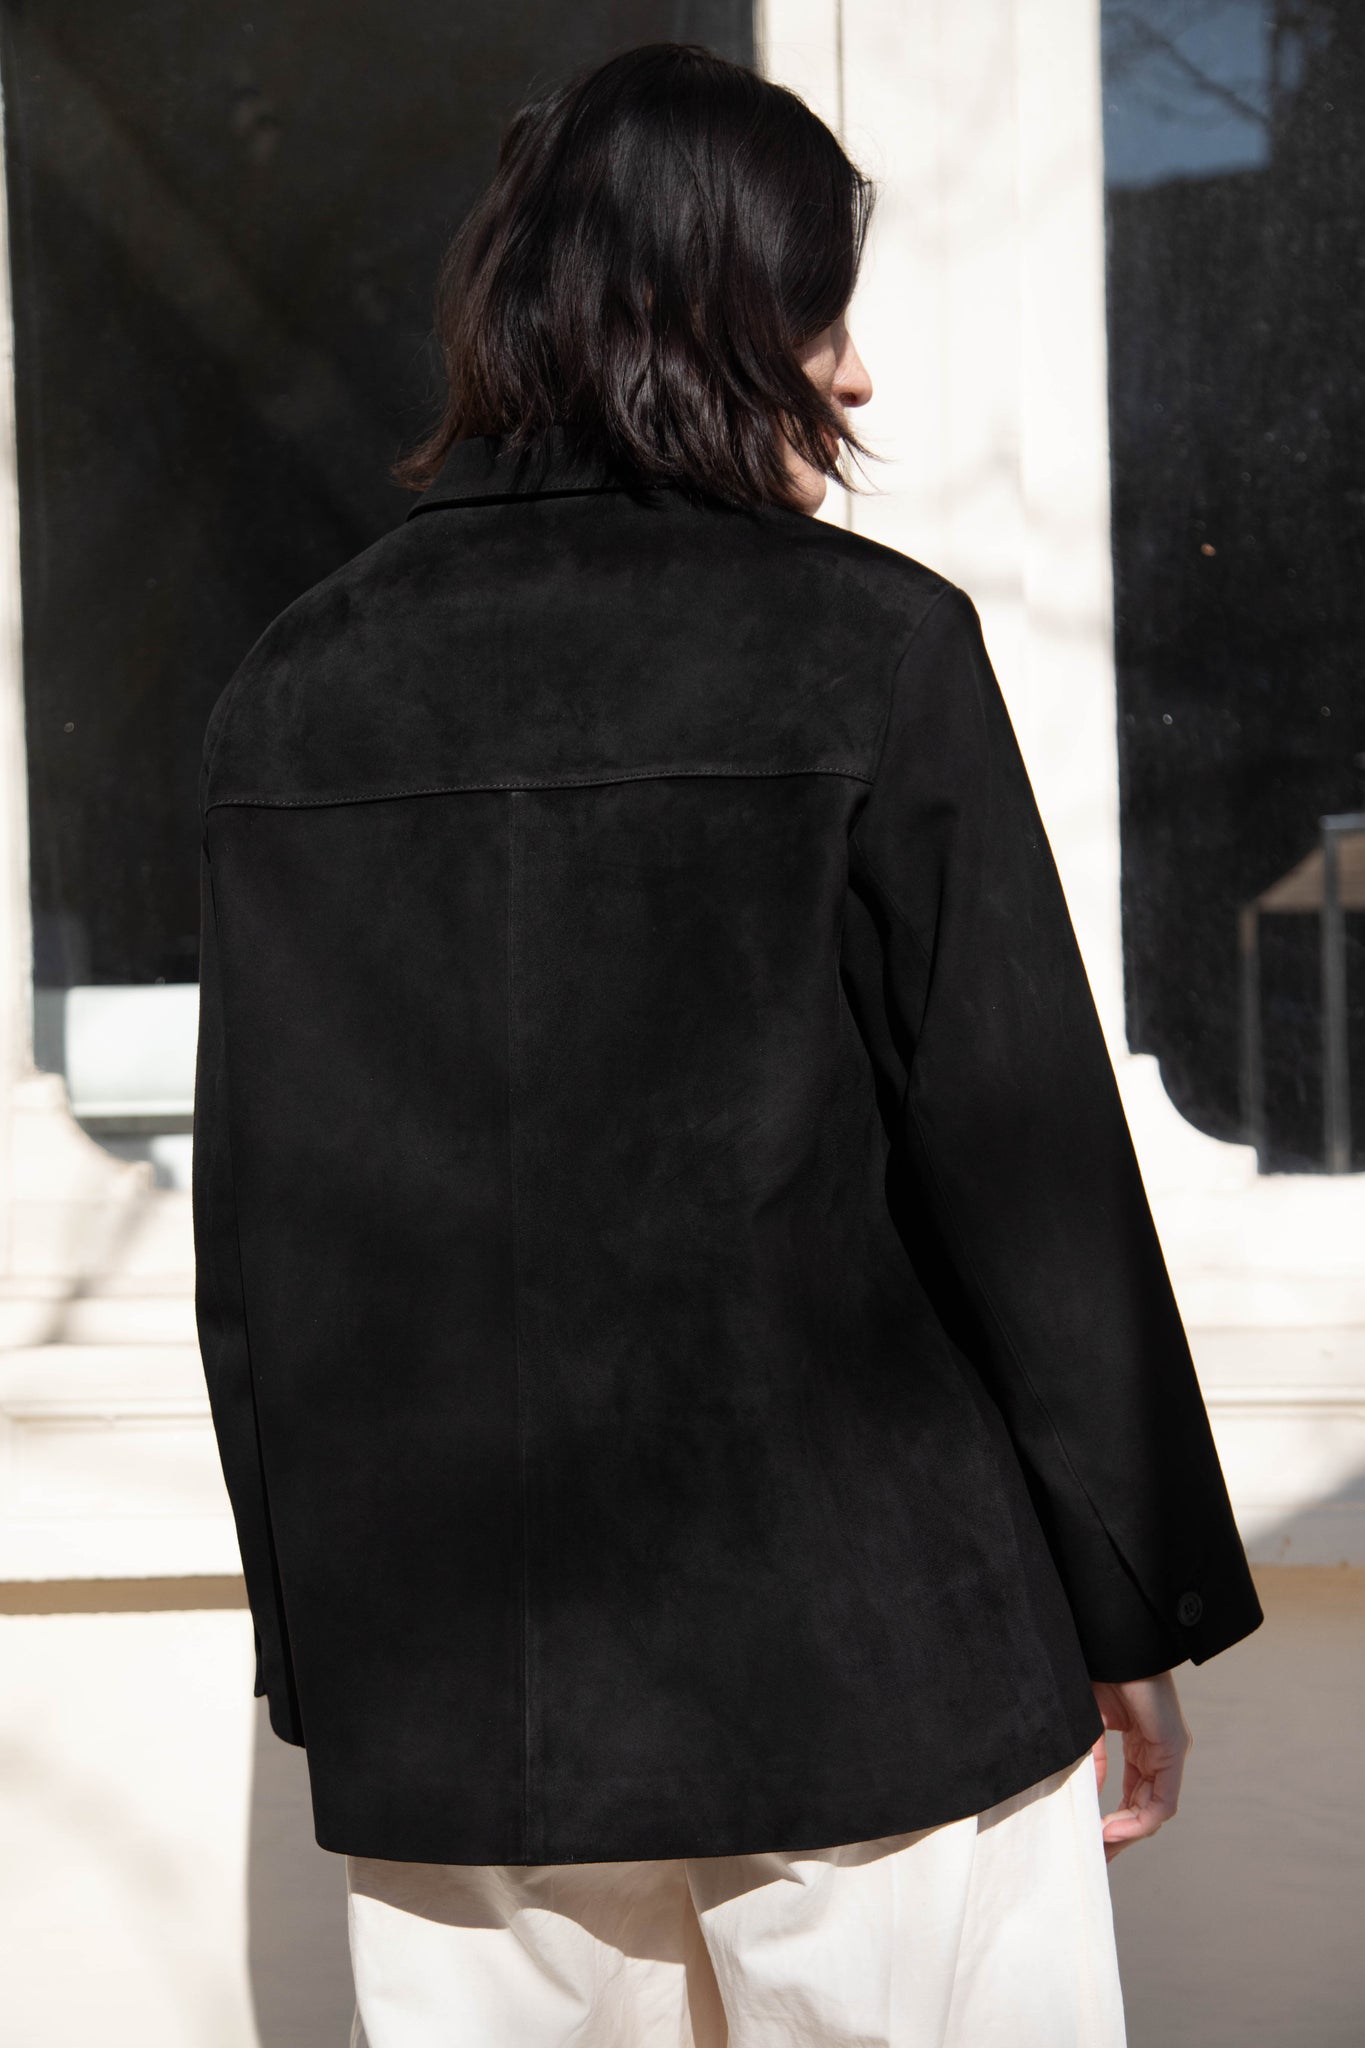 Nothing Written | Norman Leather Jacket in Black